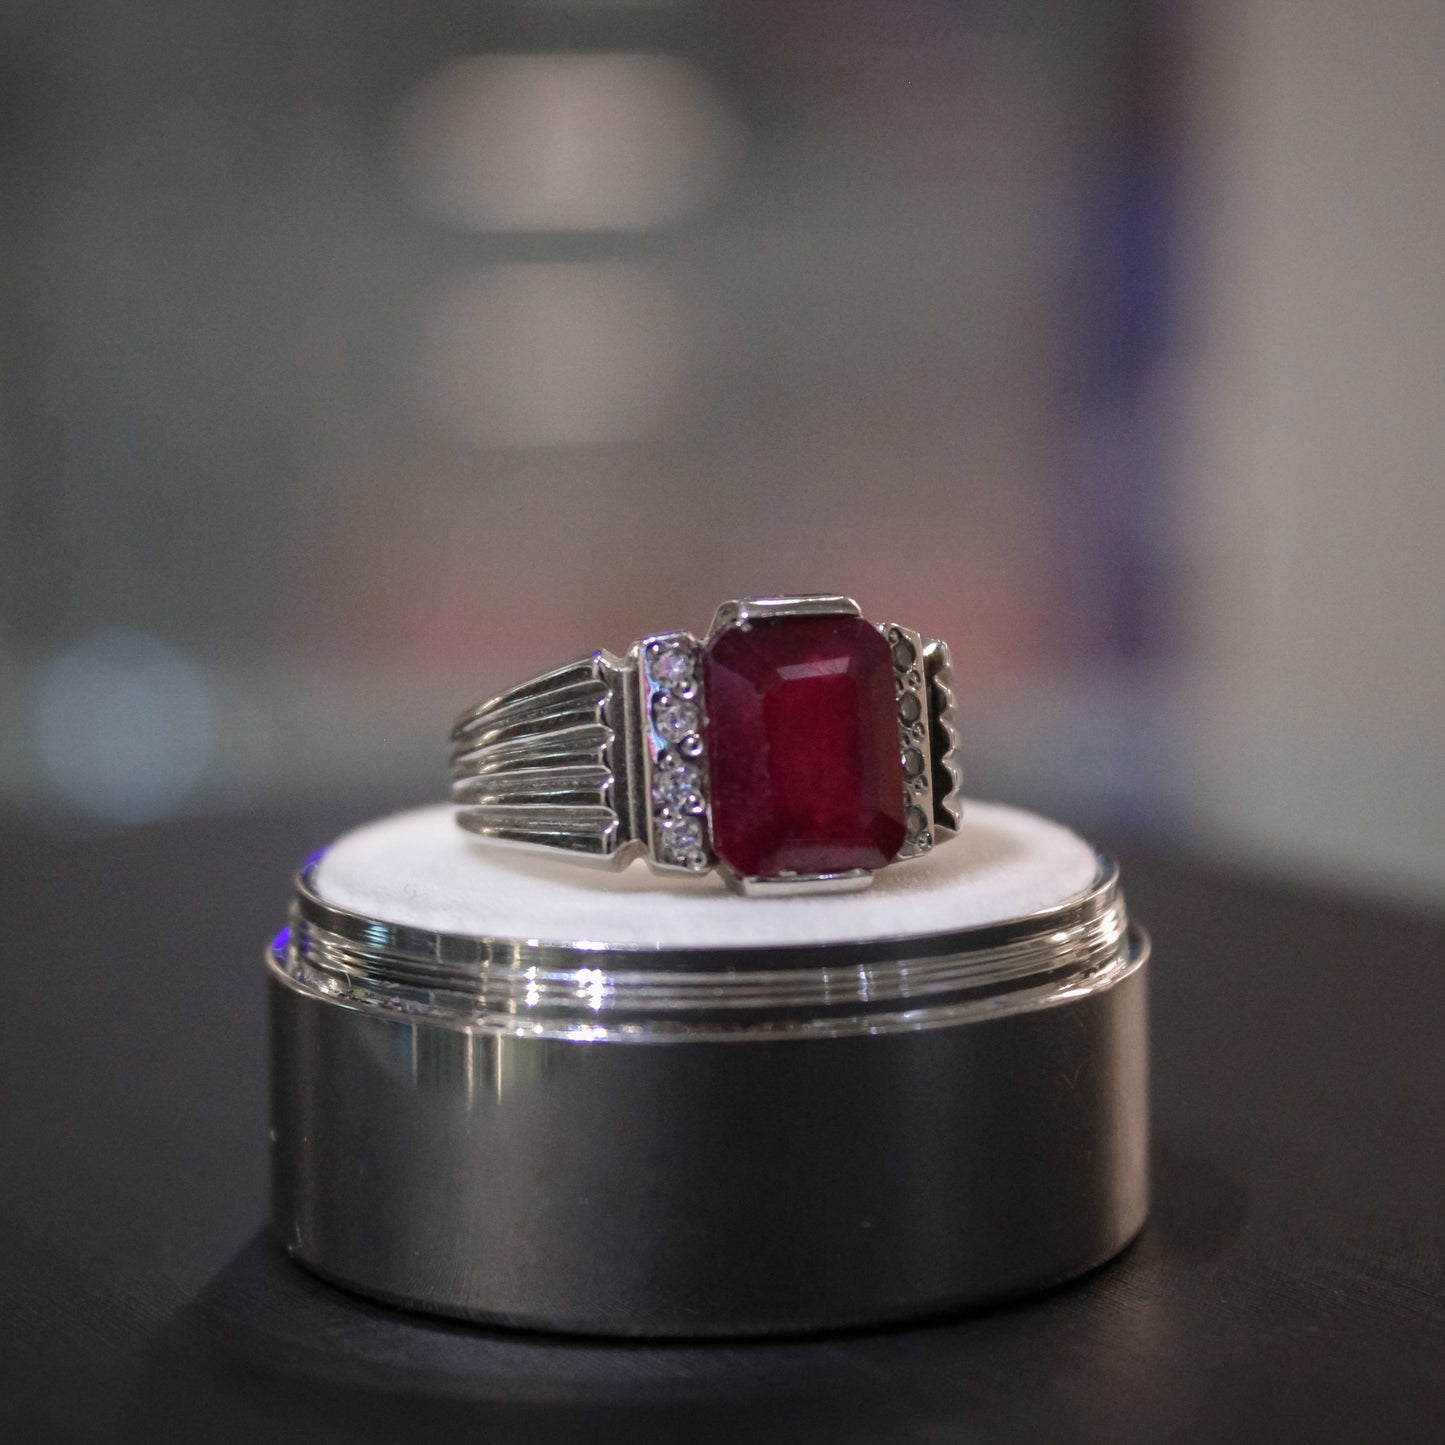 Buy Precious Women's Ruby Ring at Best Price